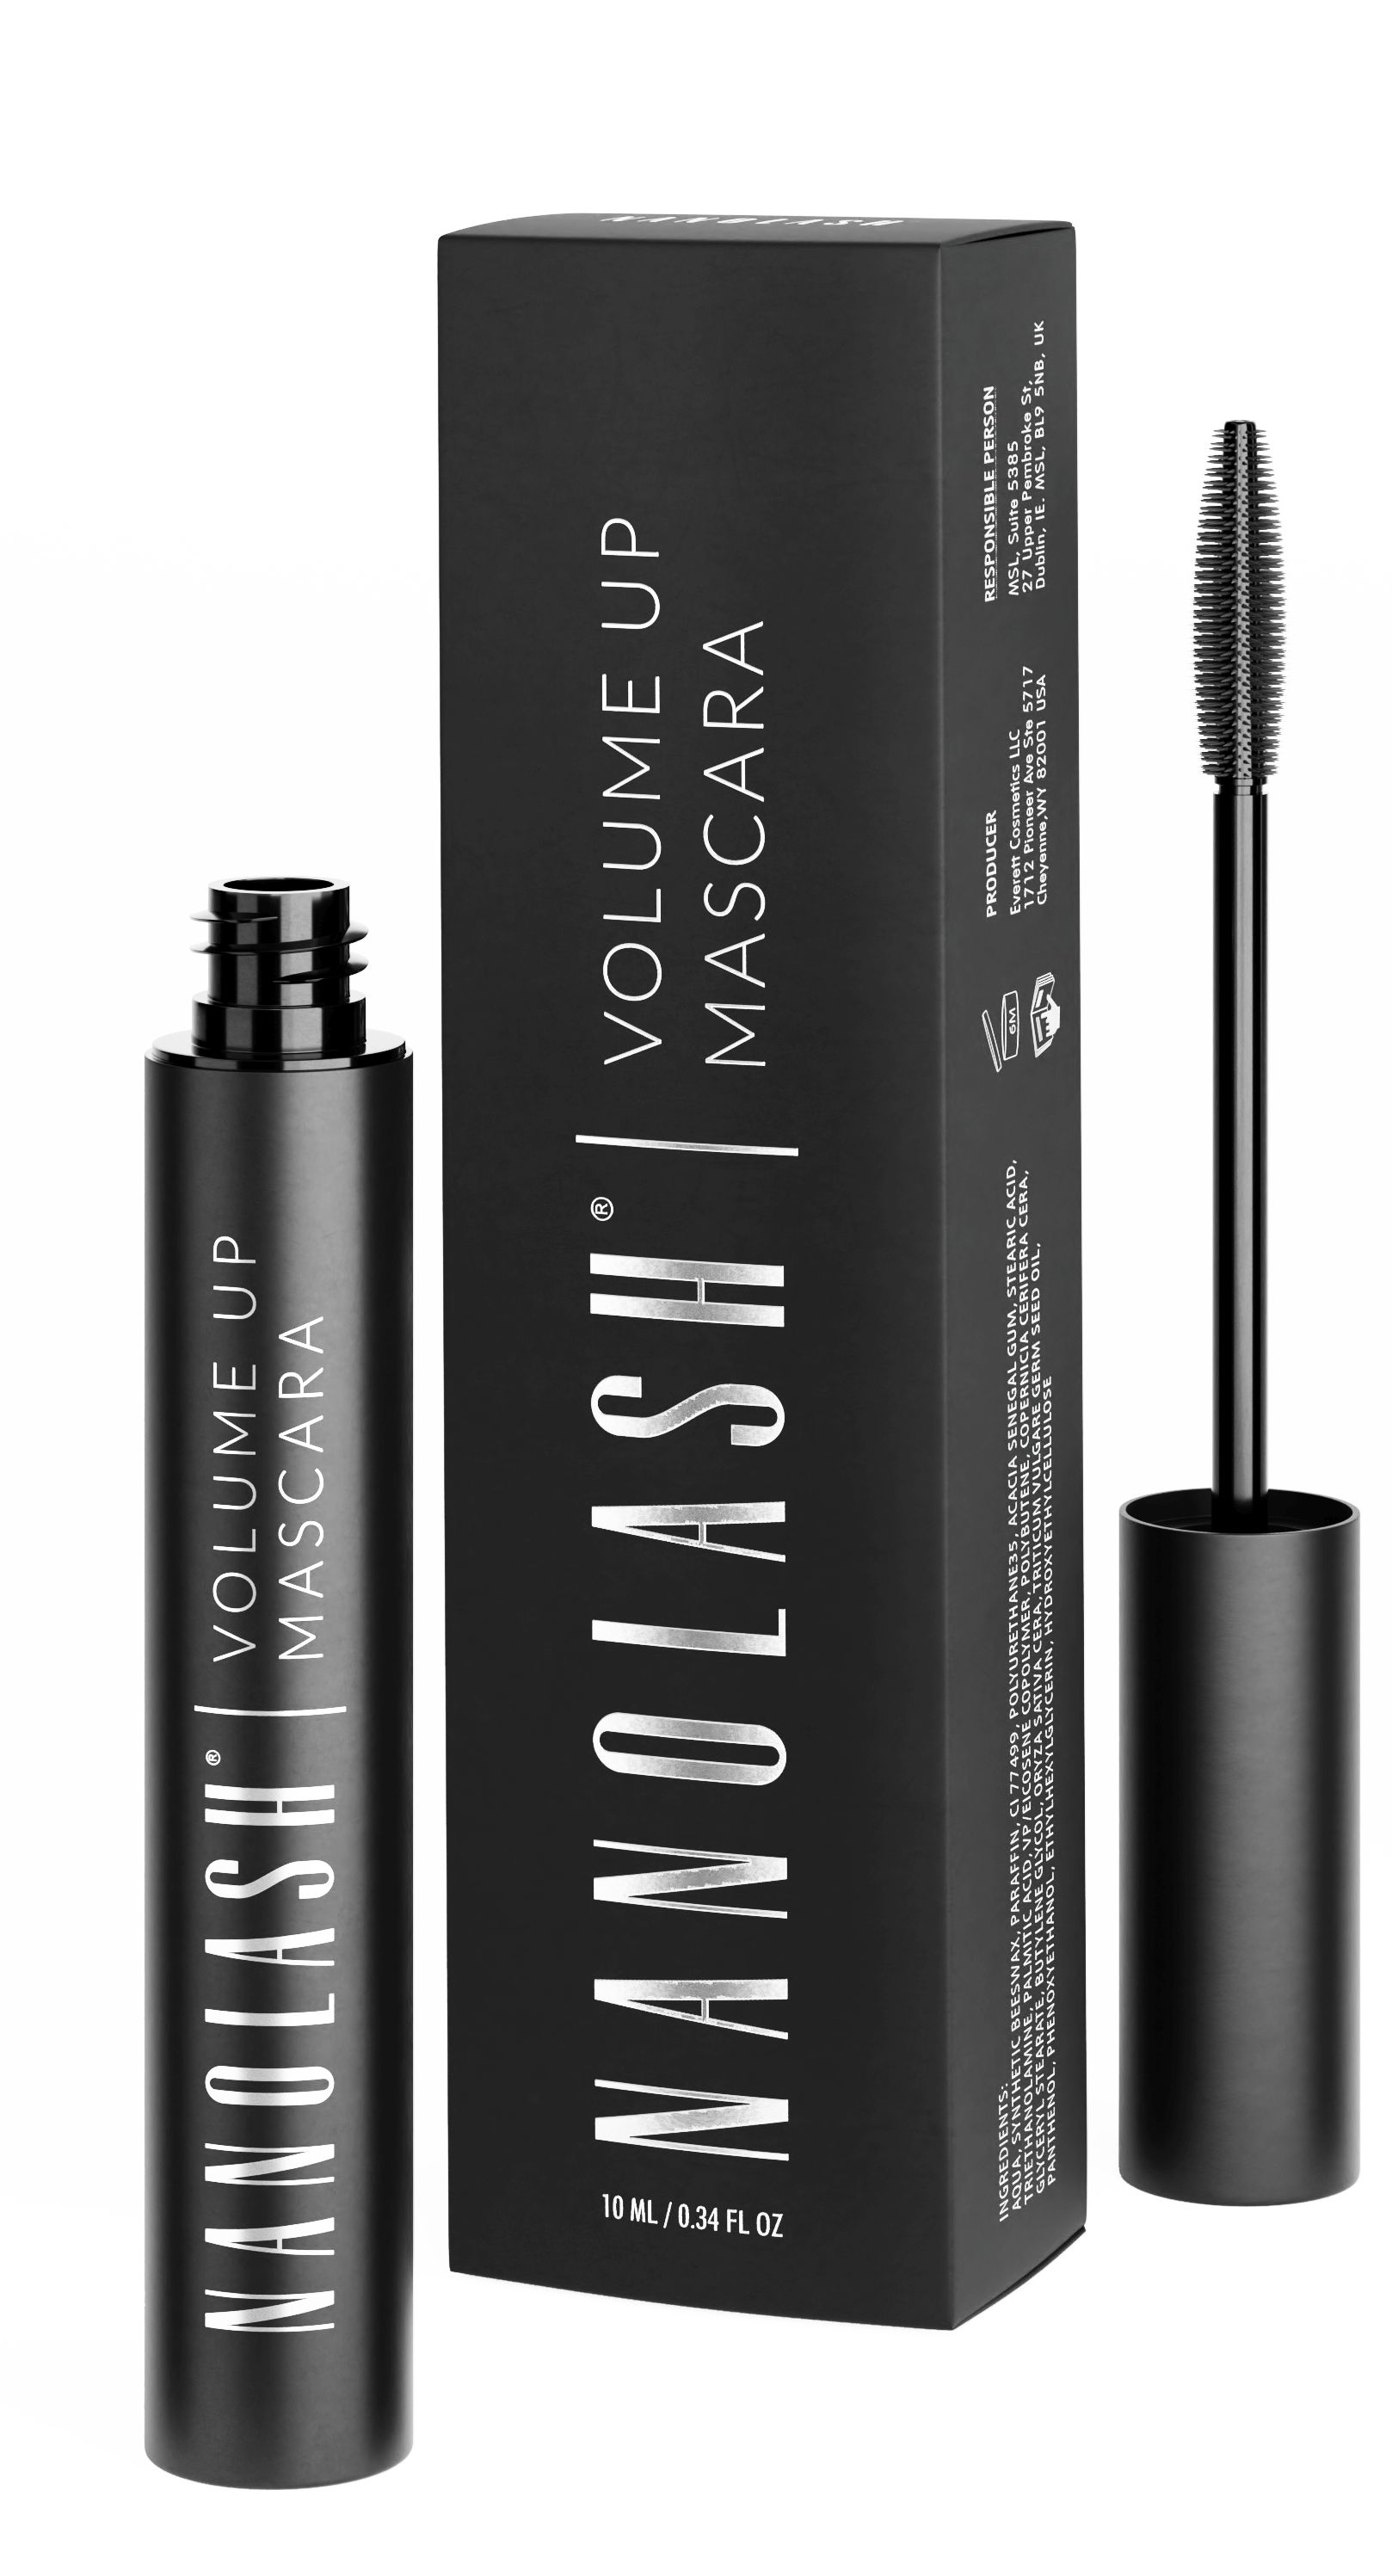 which mascara is the best